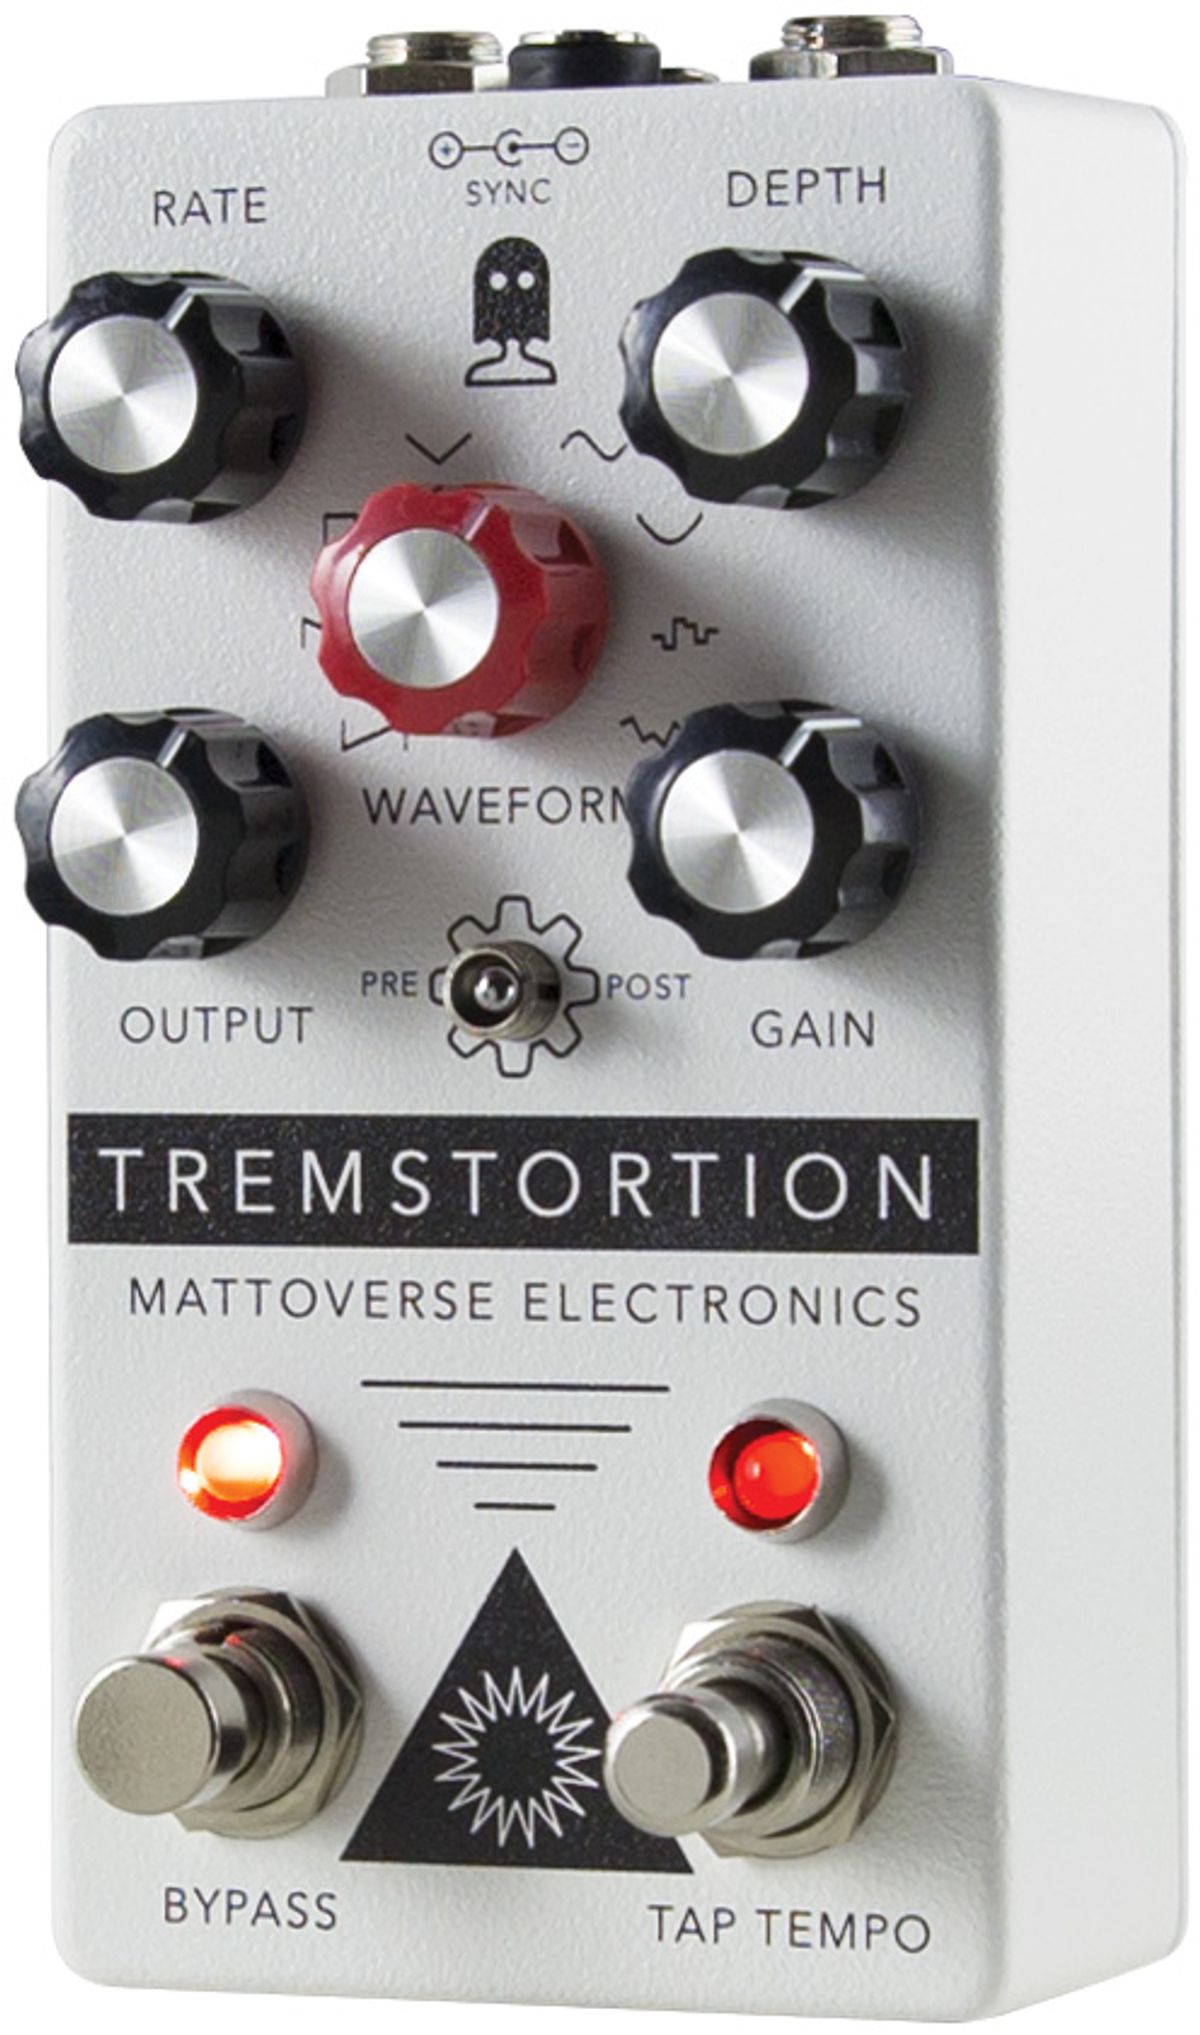 Filth and Eight Flavors of Modulated Flickering in a Single Pedal? Why Not!